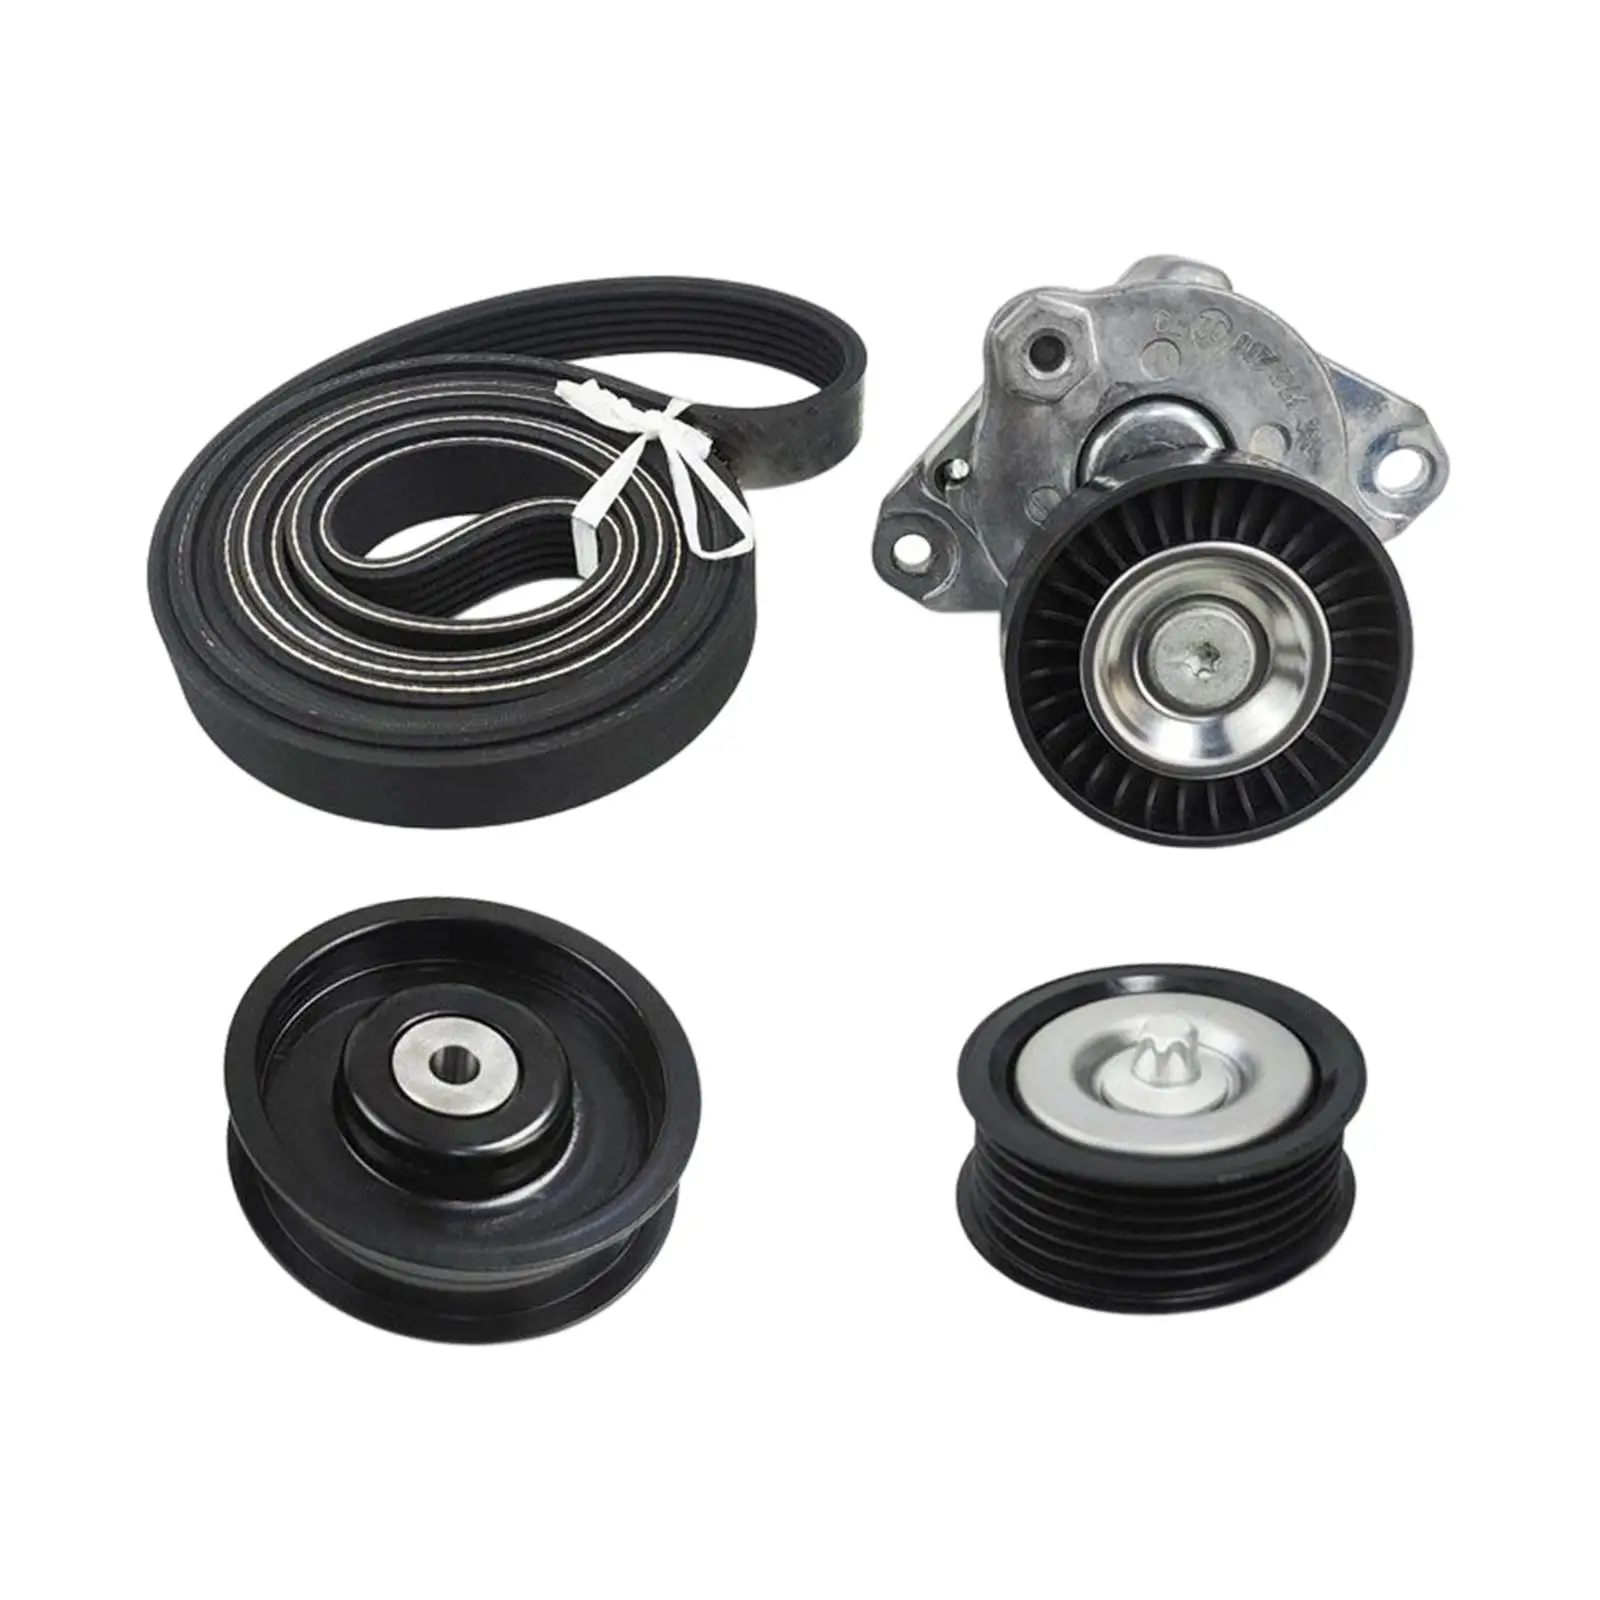 Drive Belt Tensioner+idler Pulley Repair Parts Replacement A2722000270 for Mercedes-benz C230 C280 S400 SL550 GLK350 S550